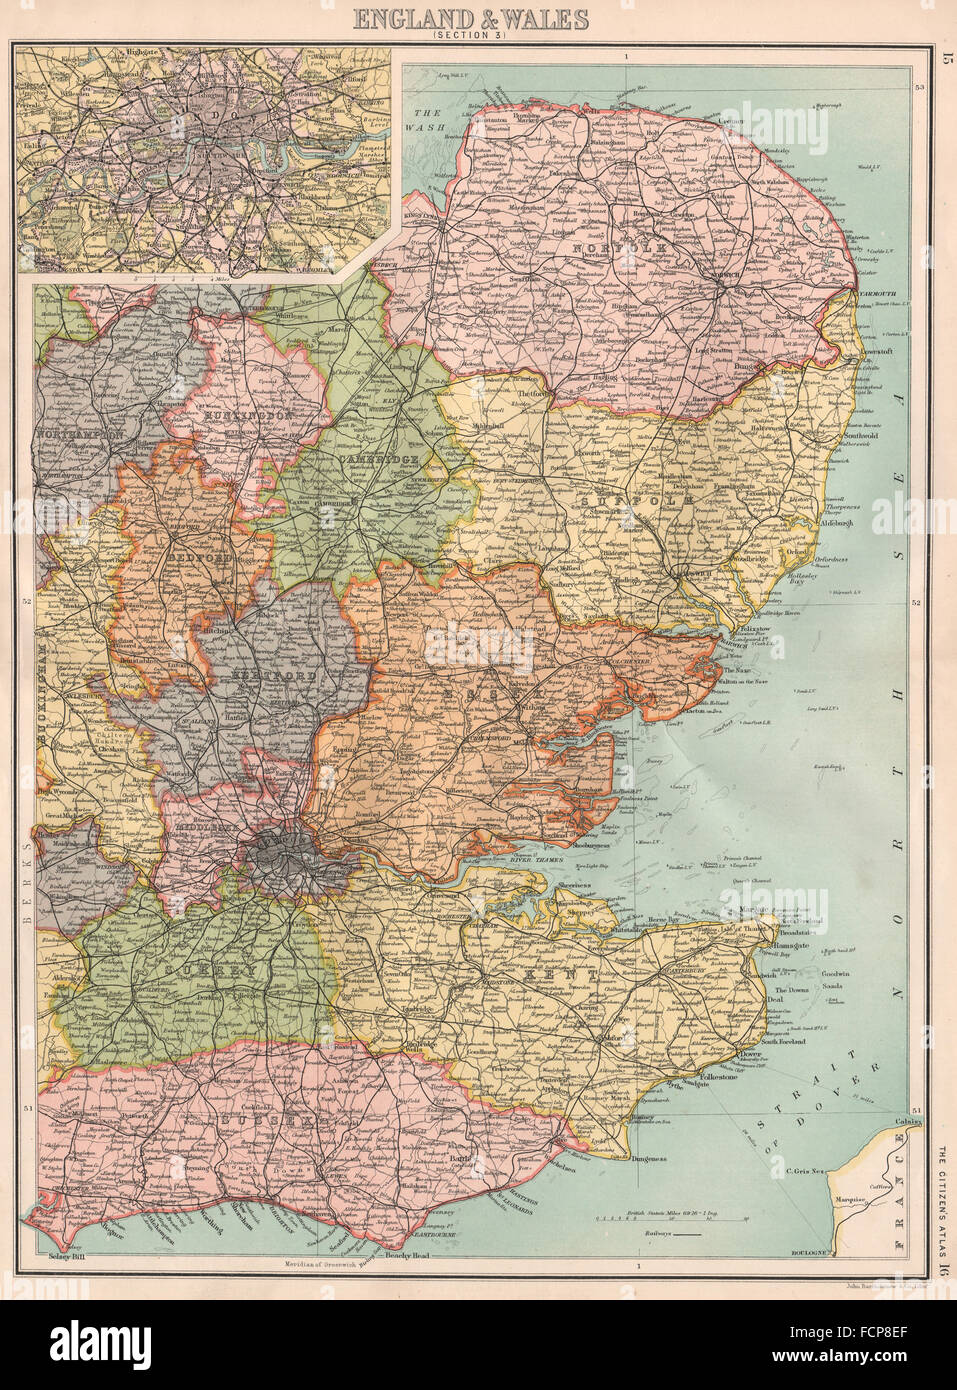 EASTERN ENGLAND: East Anglia Home Counties East Midlands London, 1898 old map Stock Photo